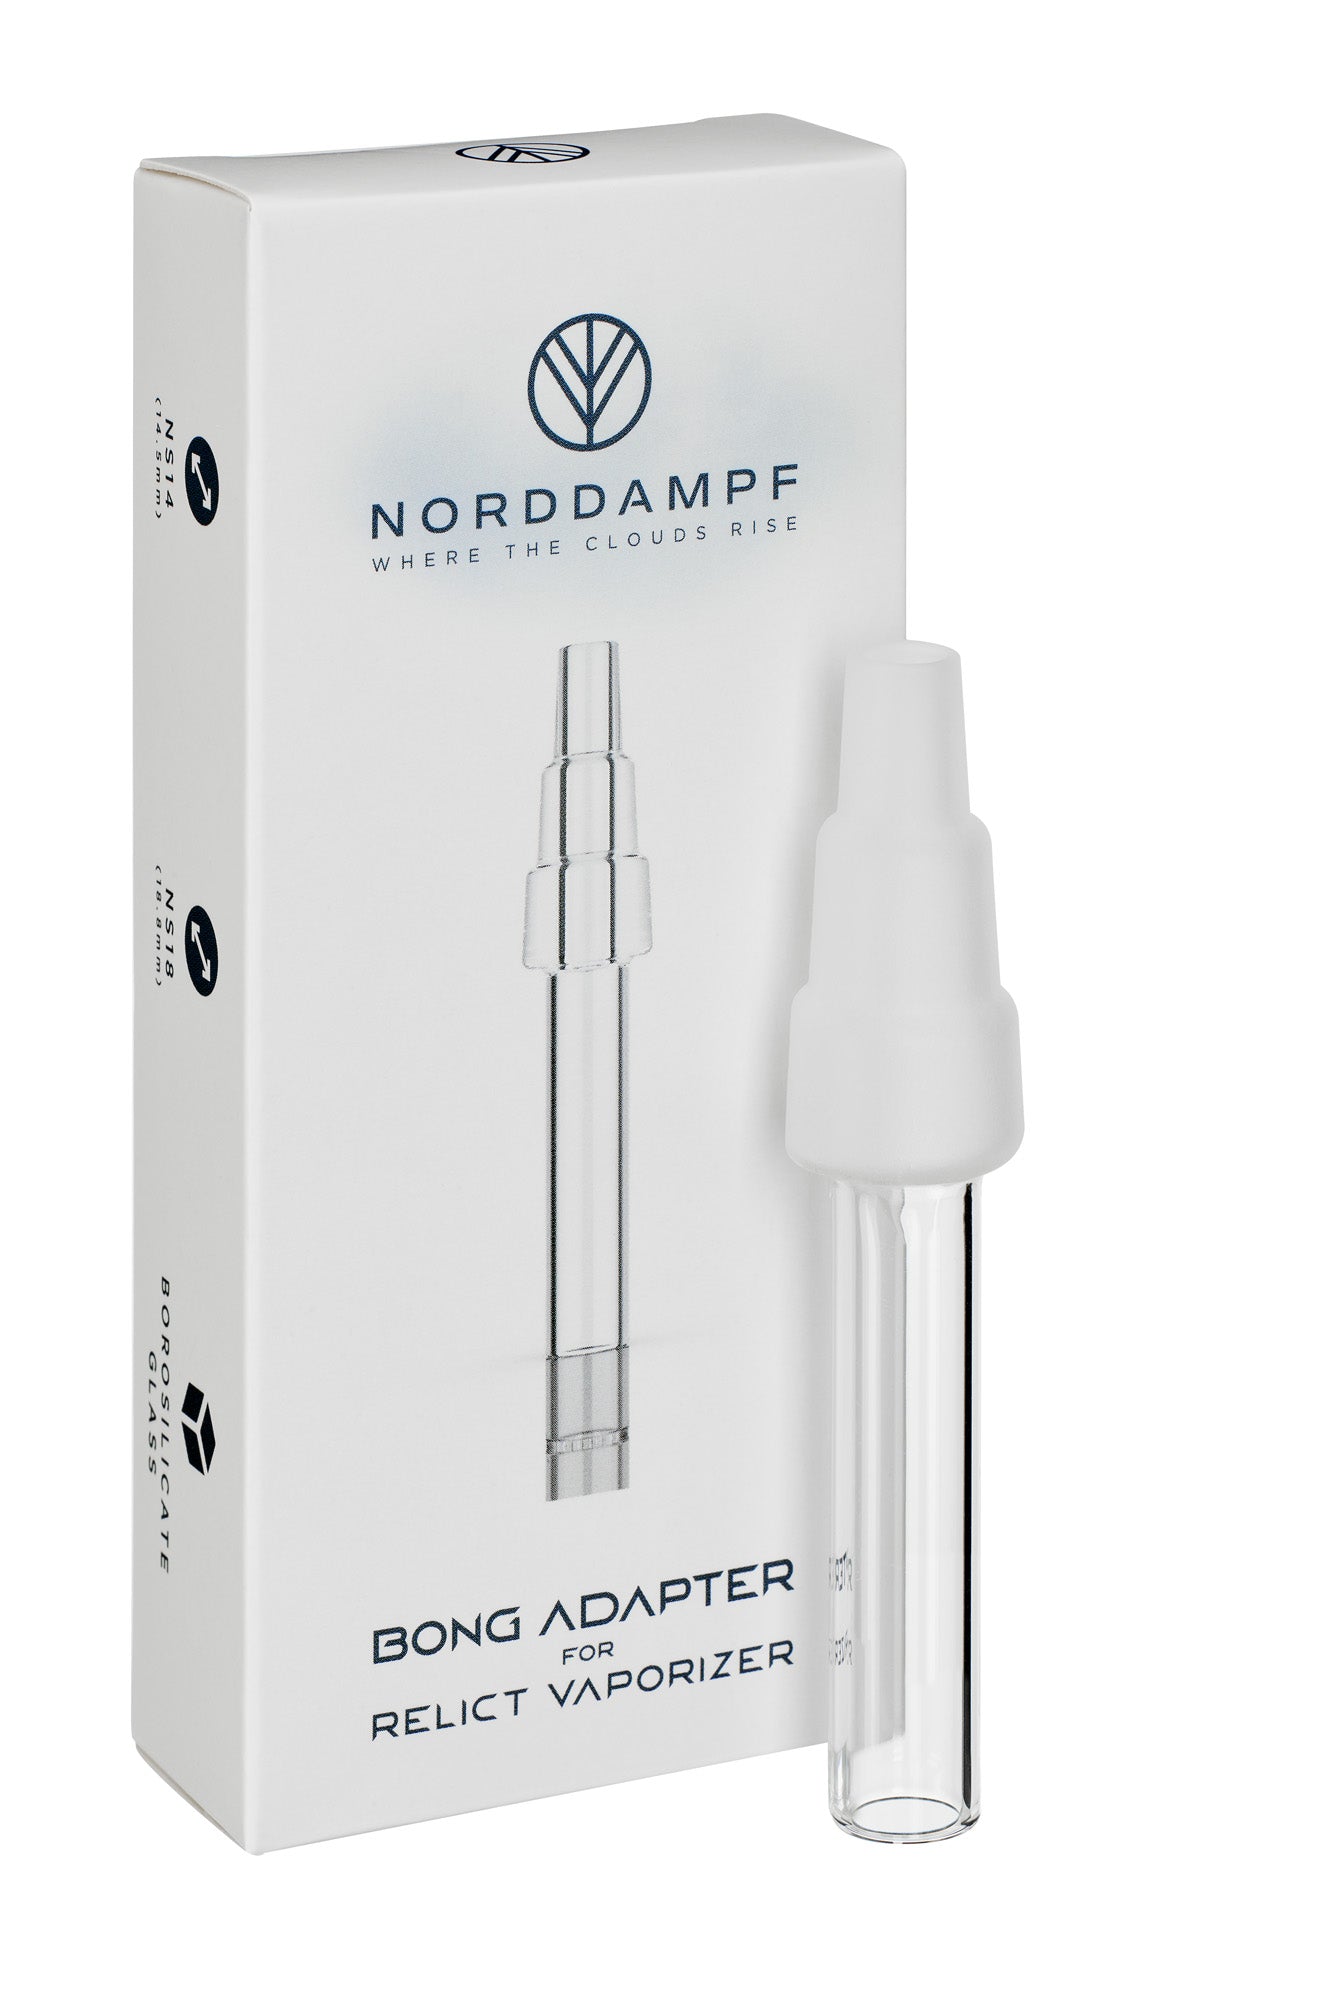 Norddampf - Relict, Bong Adapter 14/18mm